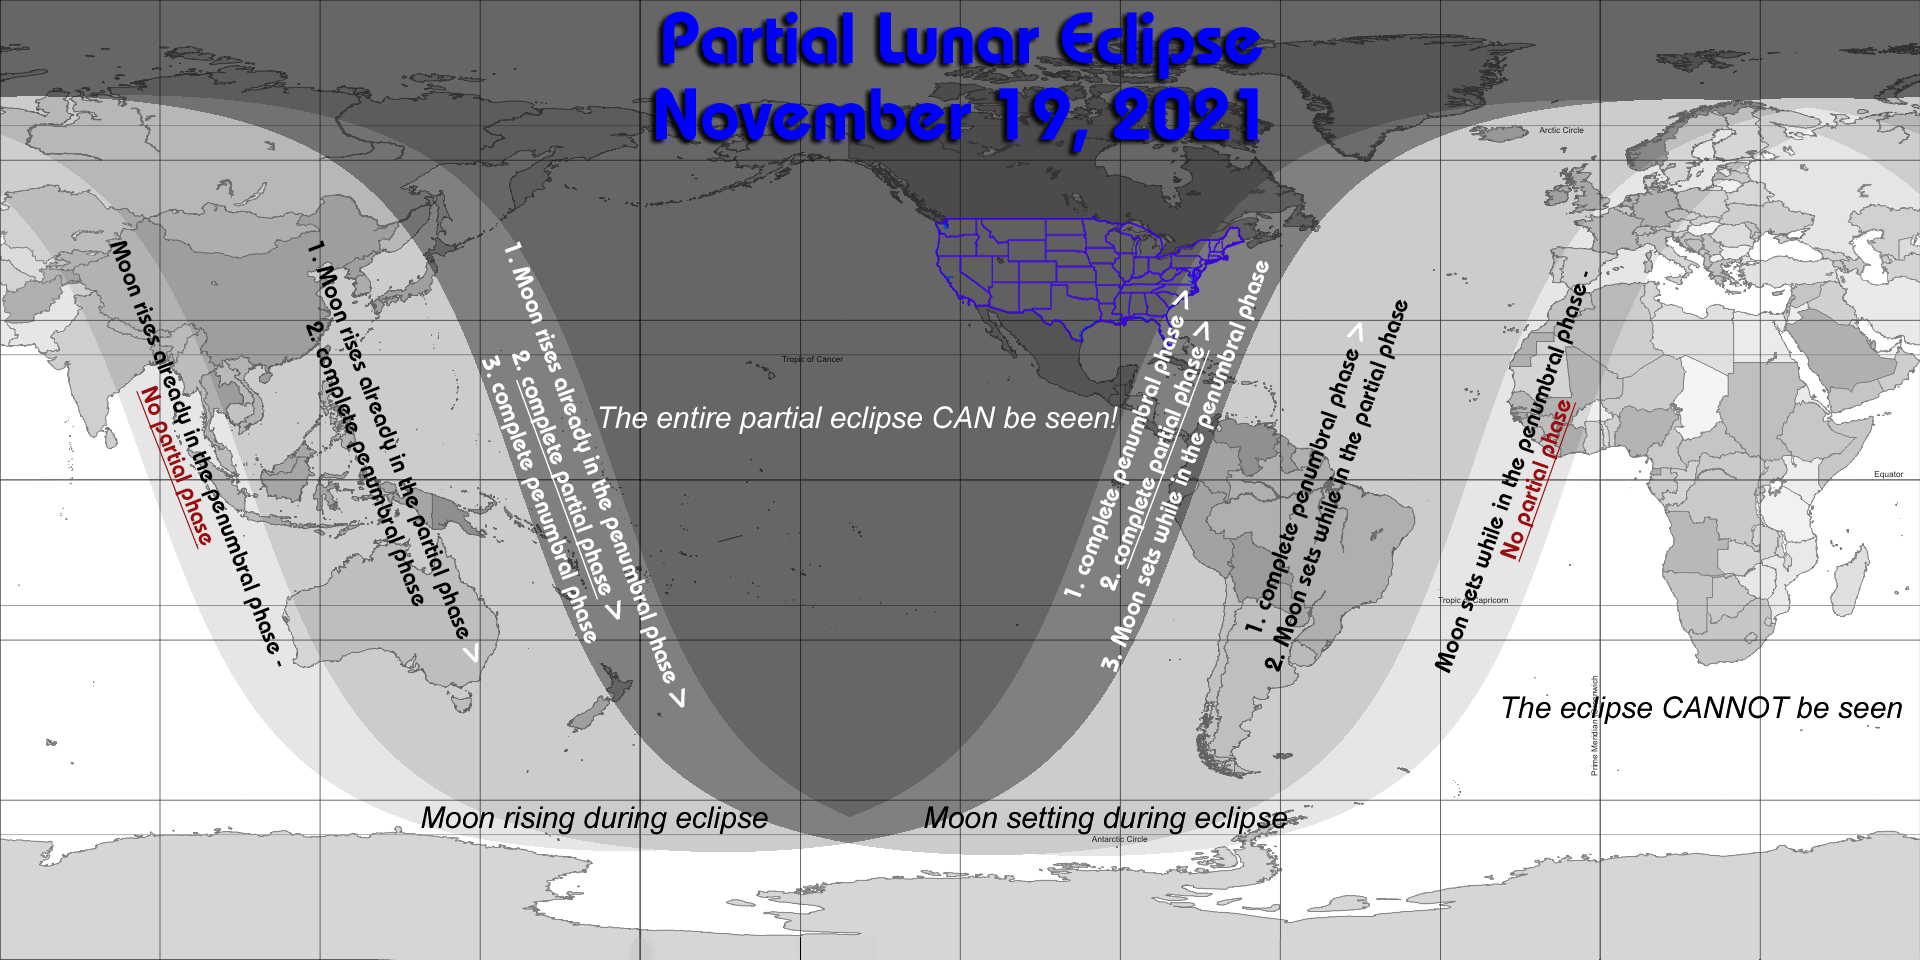 Partial Eclipse of the Moon on November 19, 2021 - Shadow ...